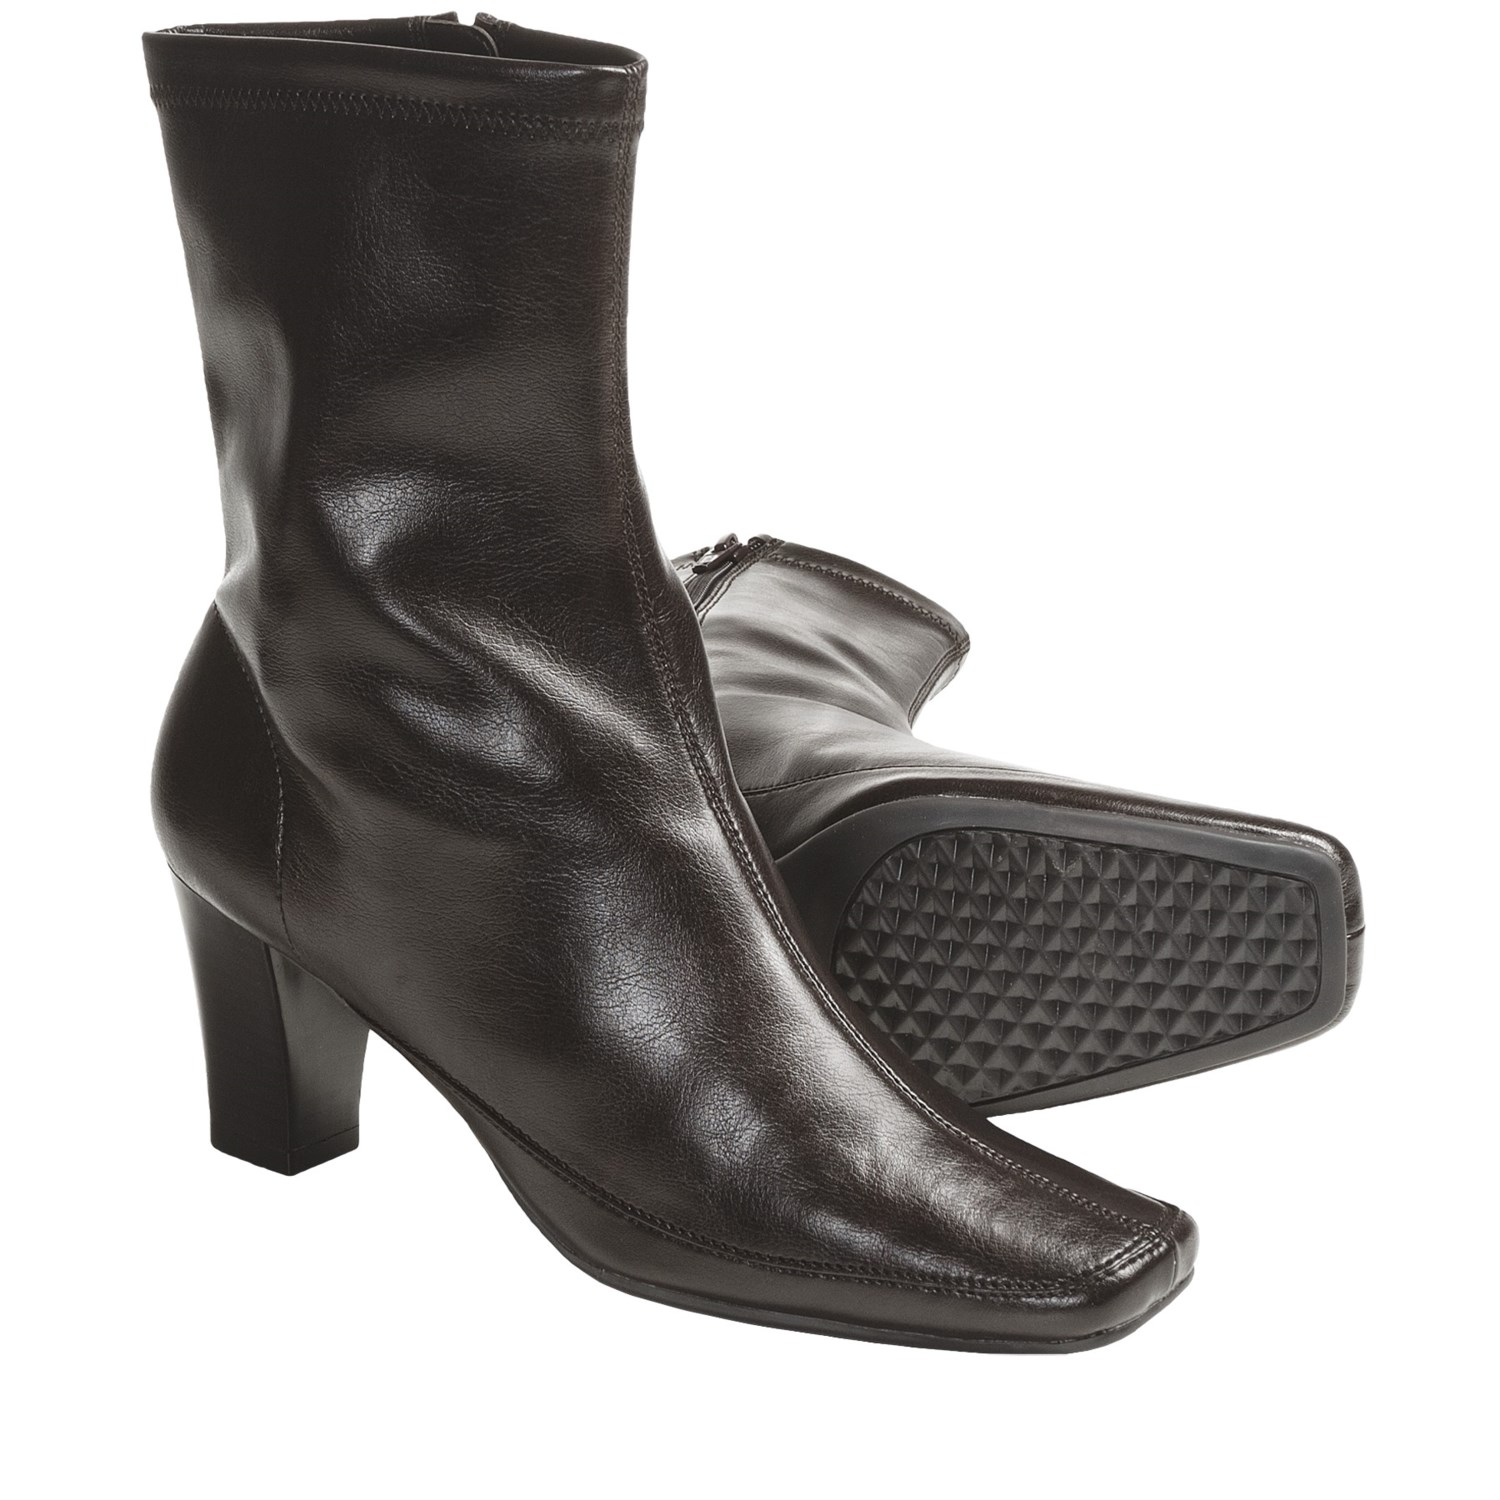 Black Ankle Boots For Women Aerosole 6